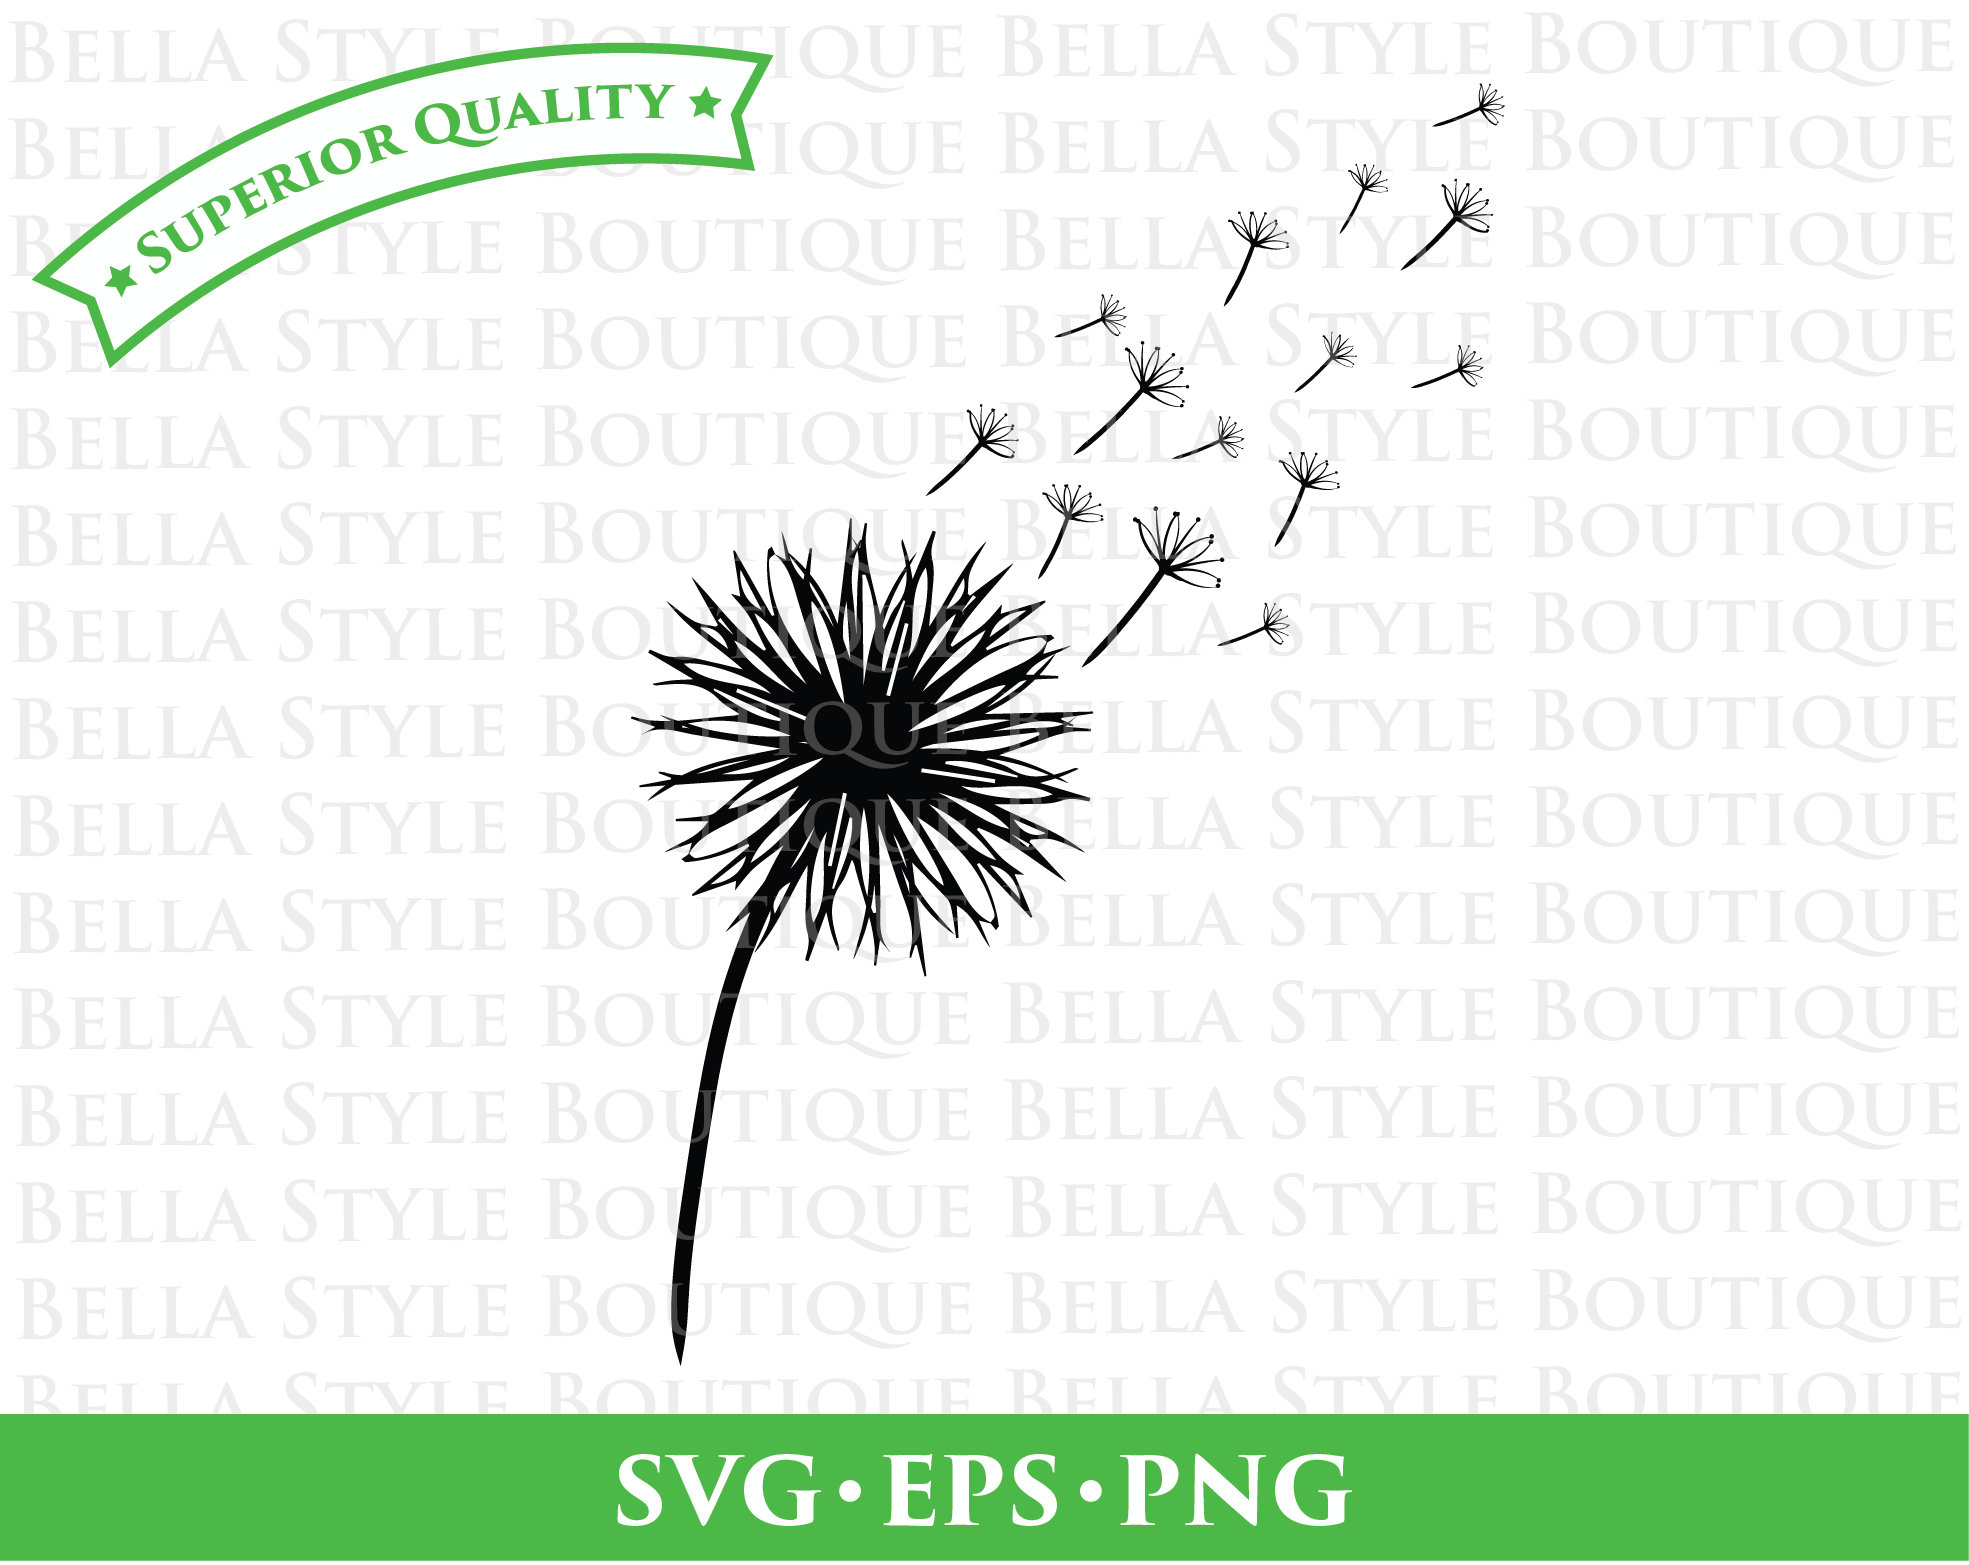 Download Dandelion Wishes svg cut file from BellaStyle on Etsy Studio